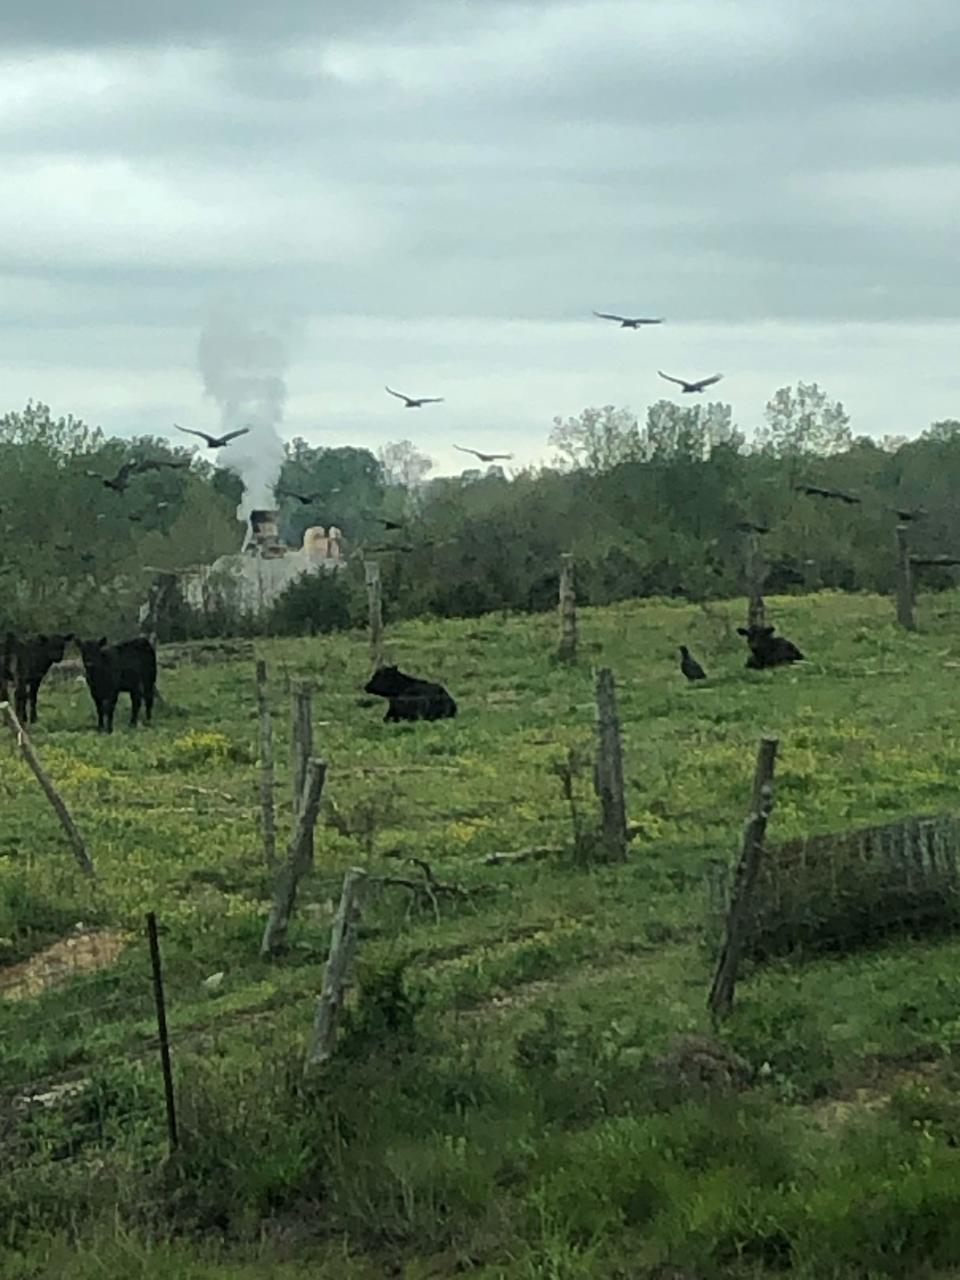 Black vultures hover around cows on John Hardin's farm in Scott County. Hardin has lost at least two cows and calves to black vultures, that are much more aggressive than turkey vultures and will attack live animals.